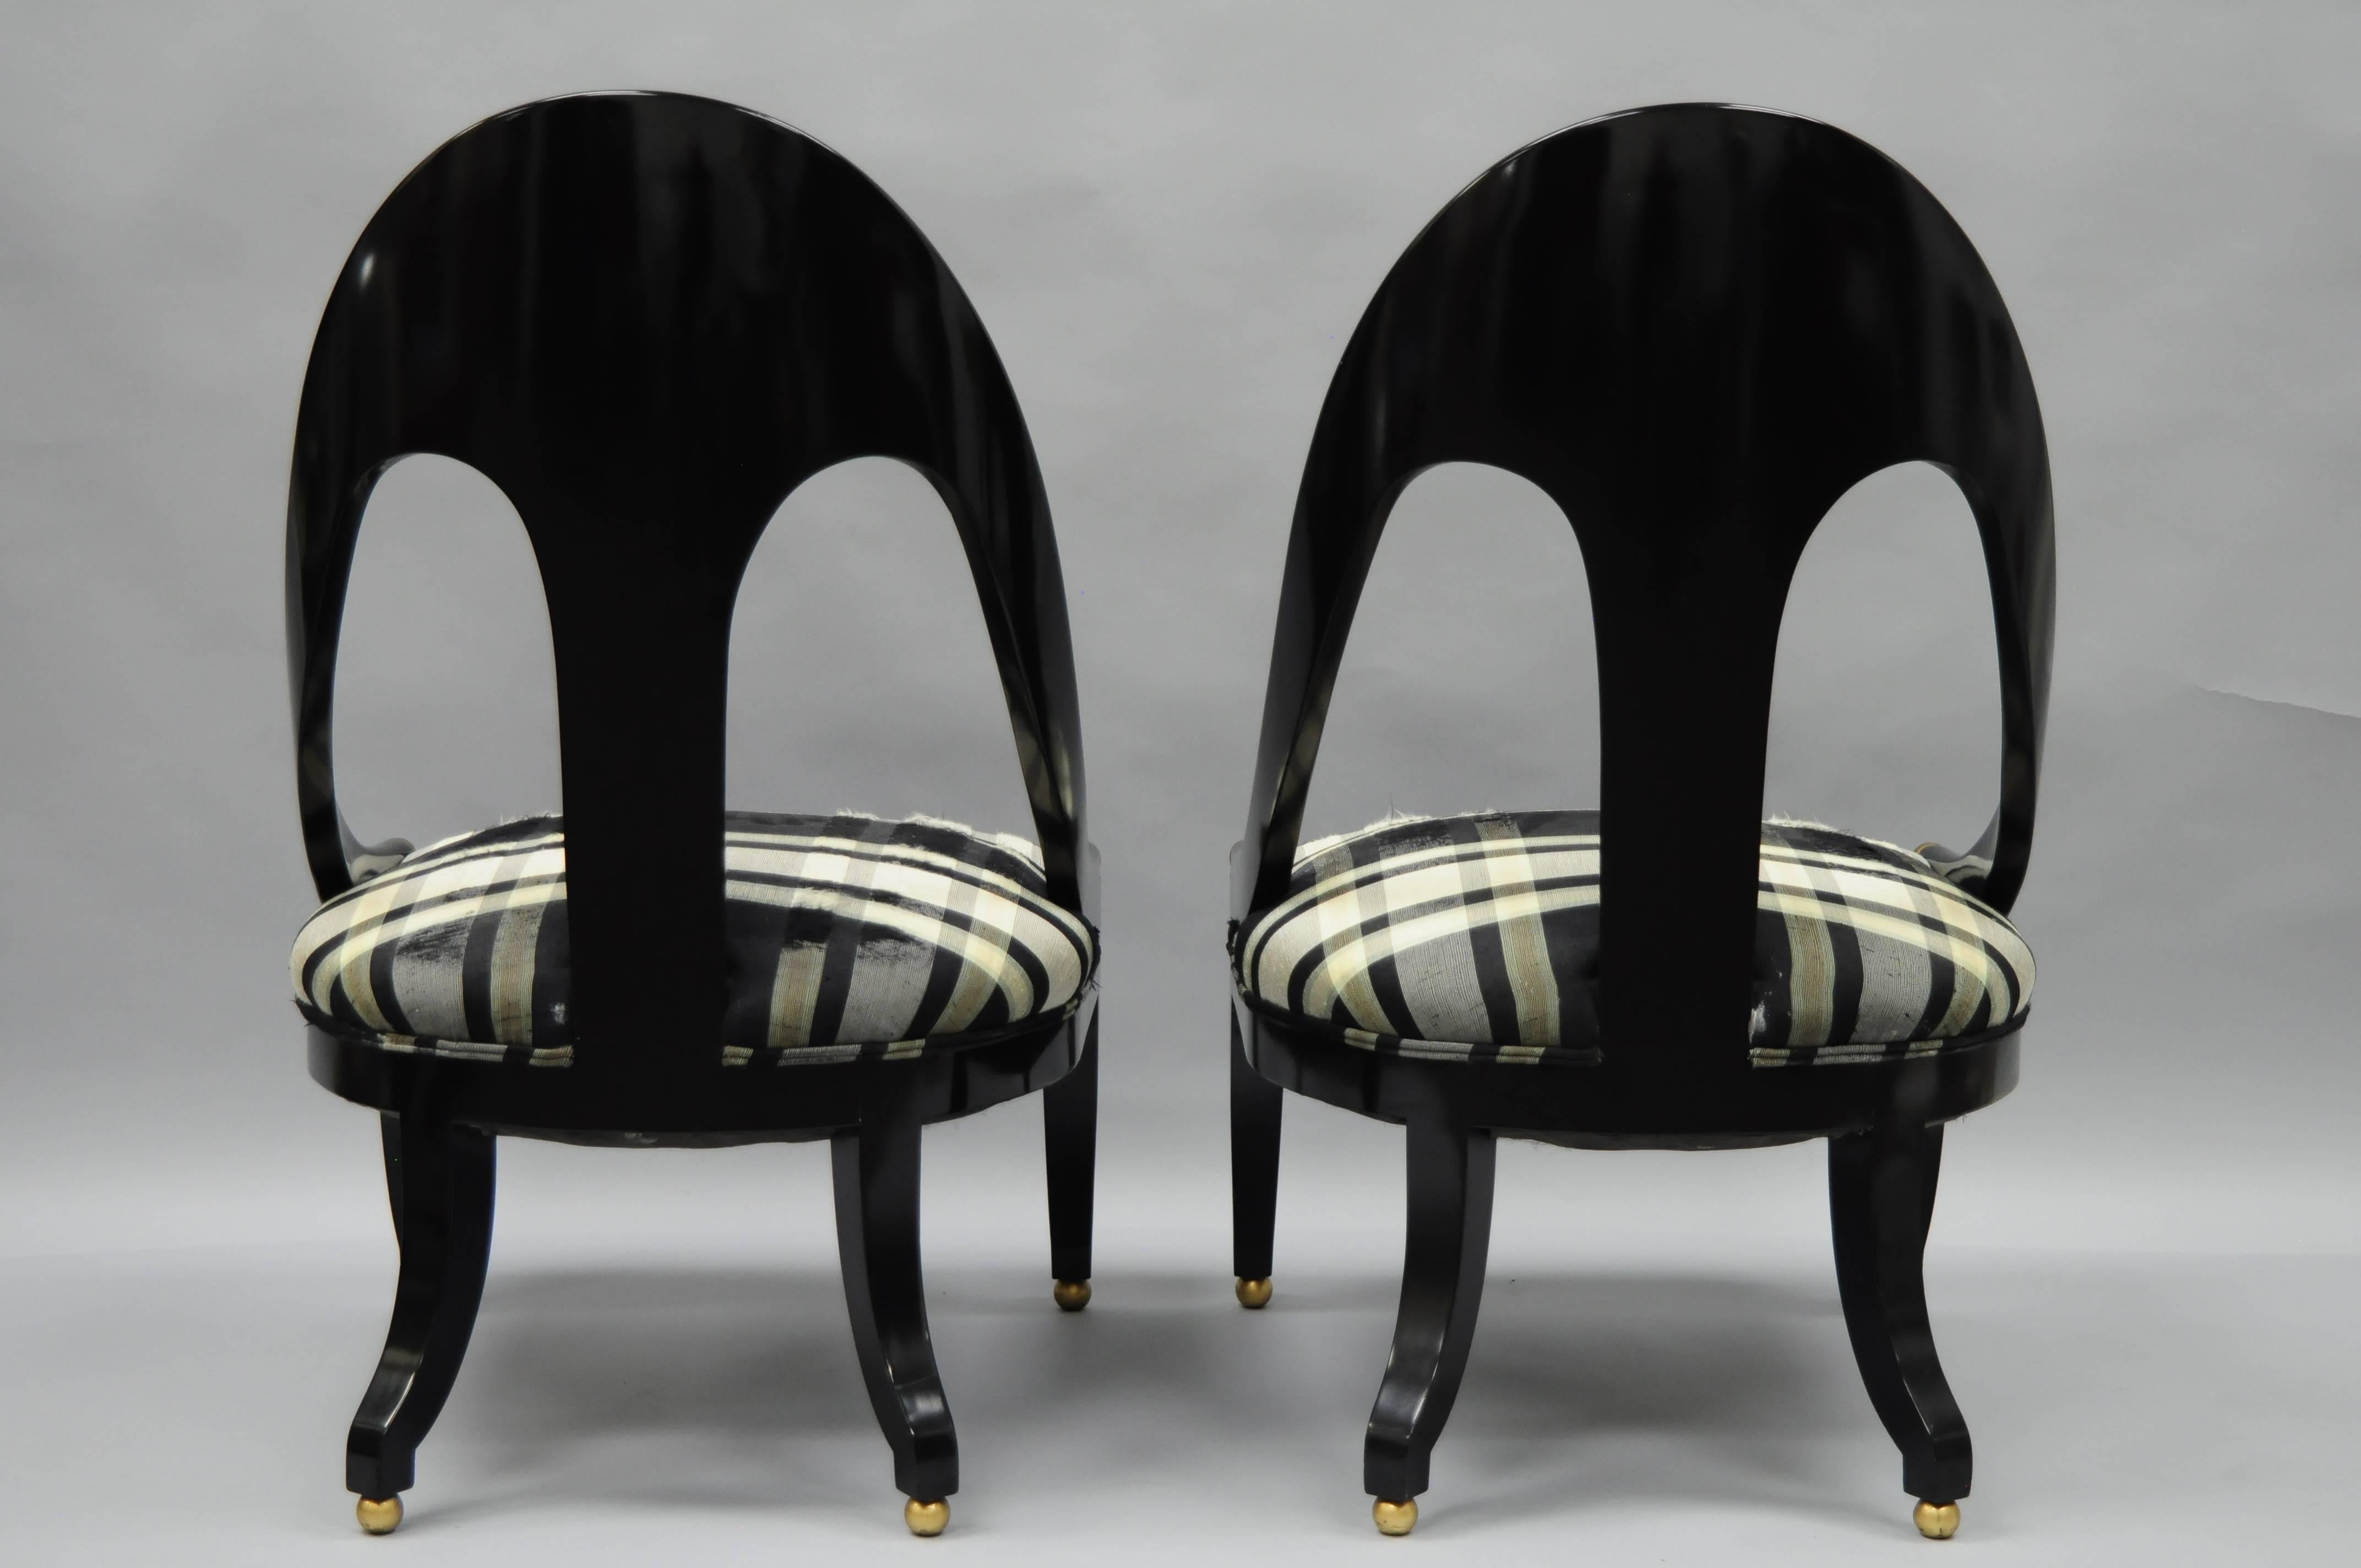 20th Century Pair of Michael Taylor for Baker Black Lacquer & Gold Spoon Back Slipper Chairs